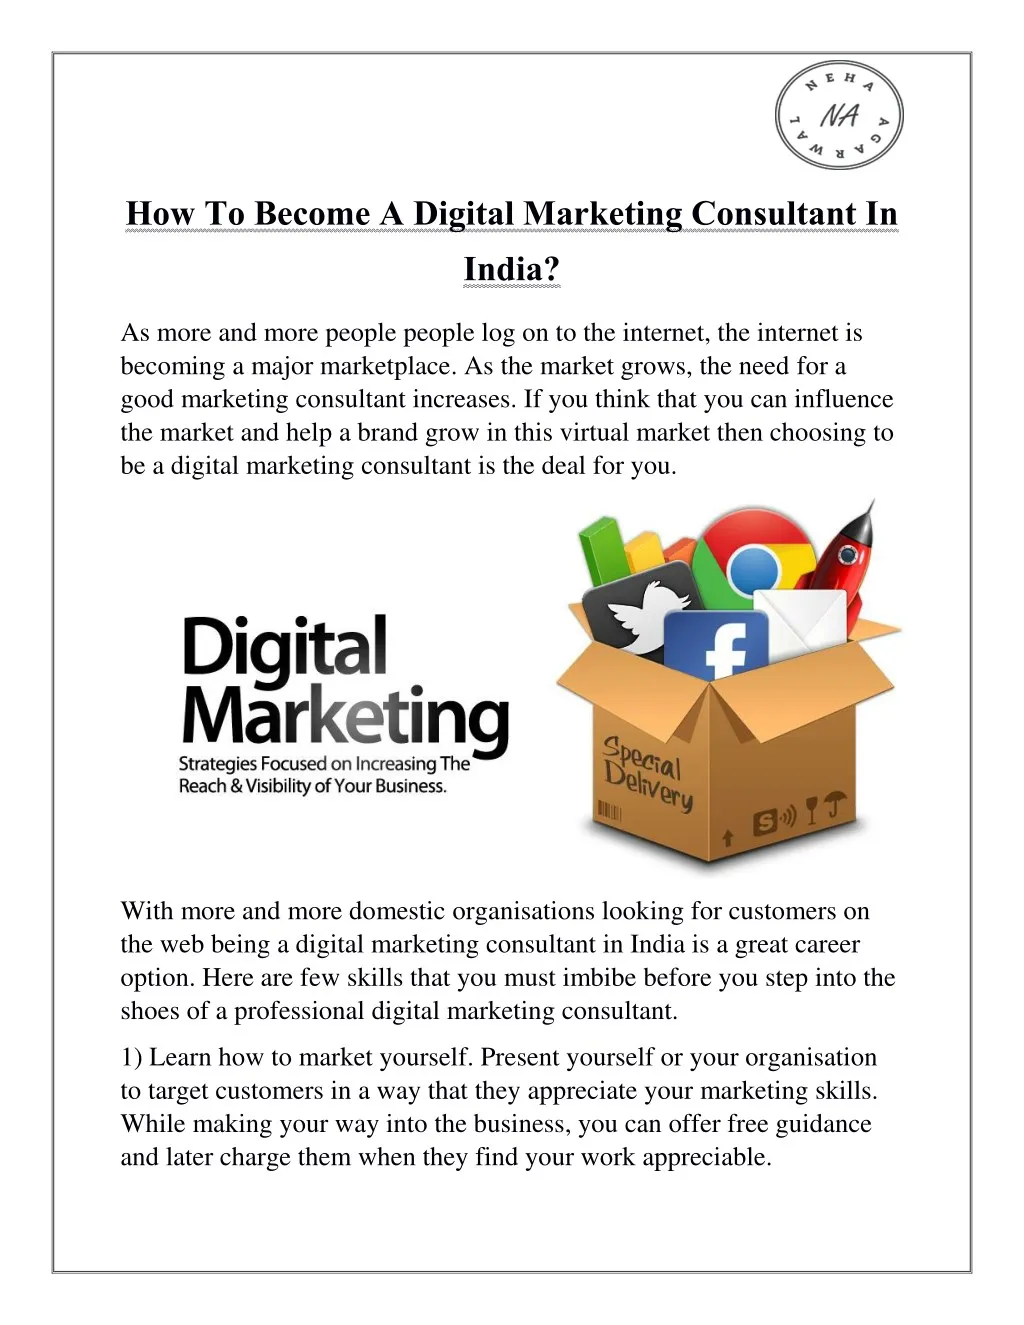 how to become a digital marketing consultant